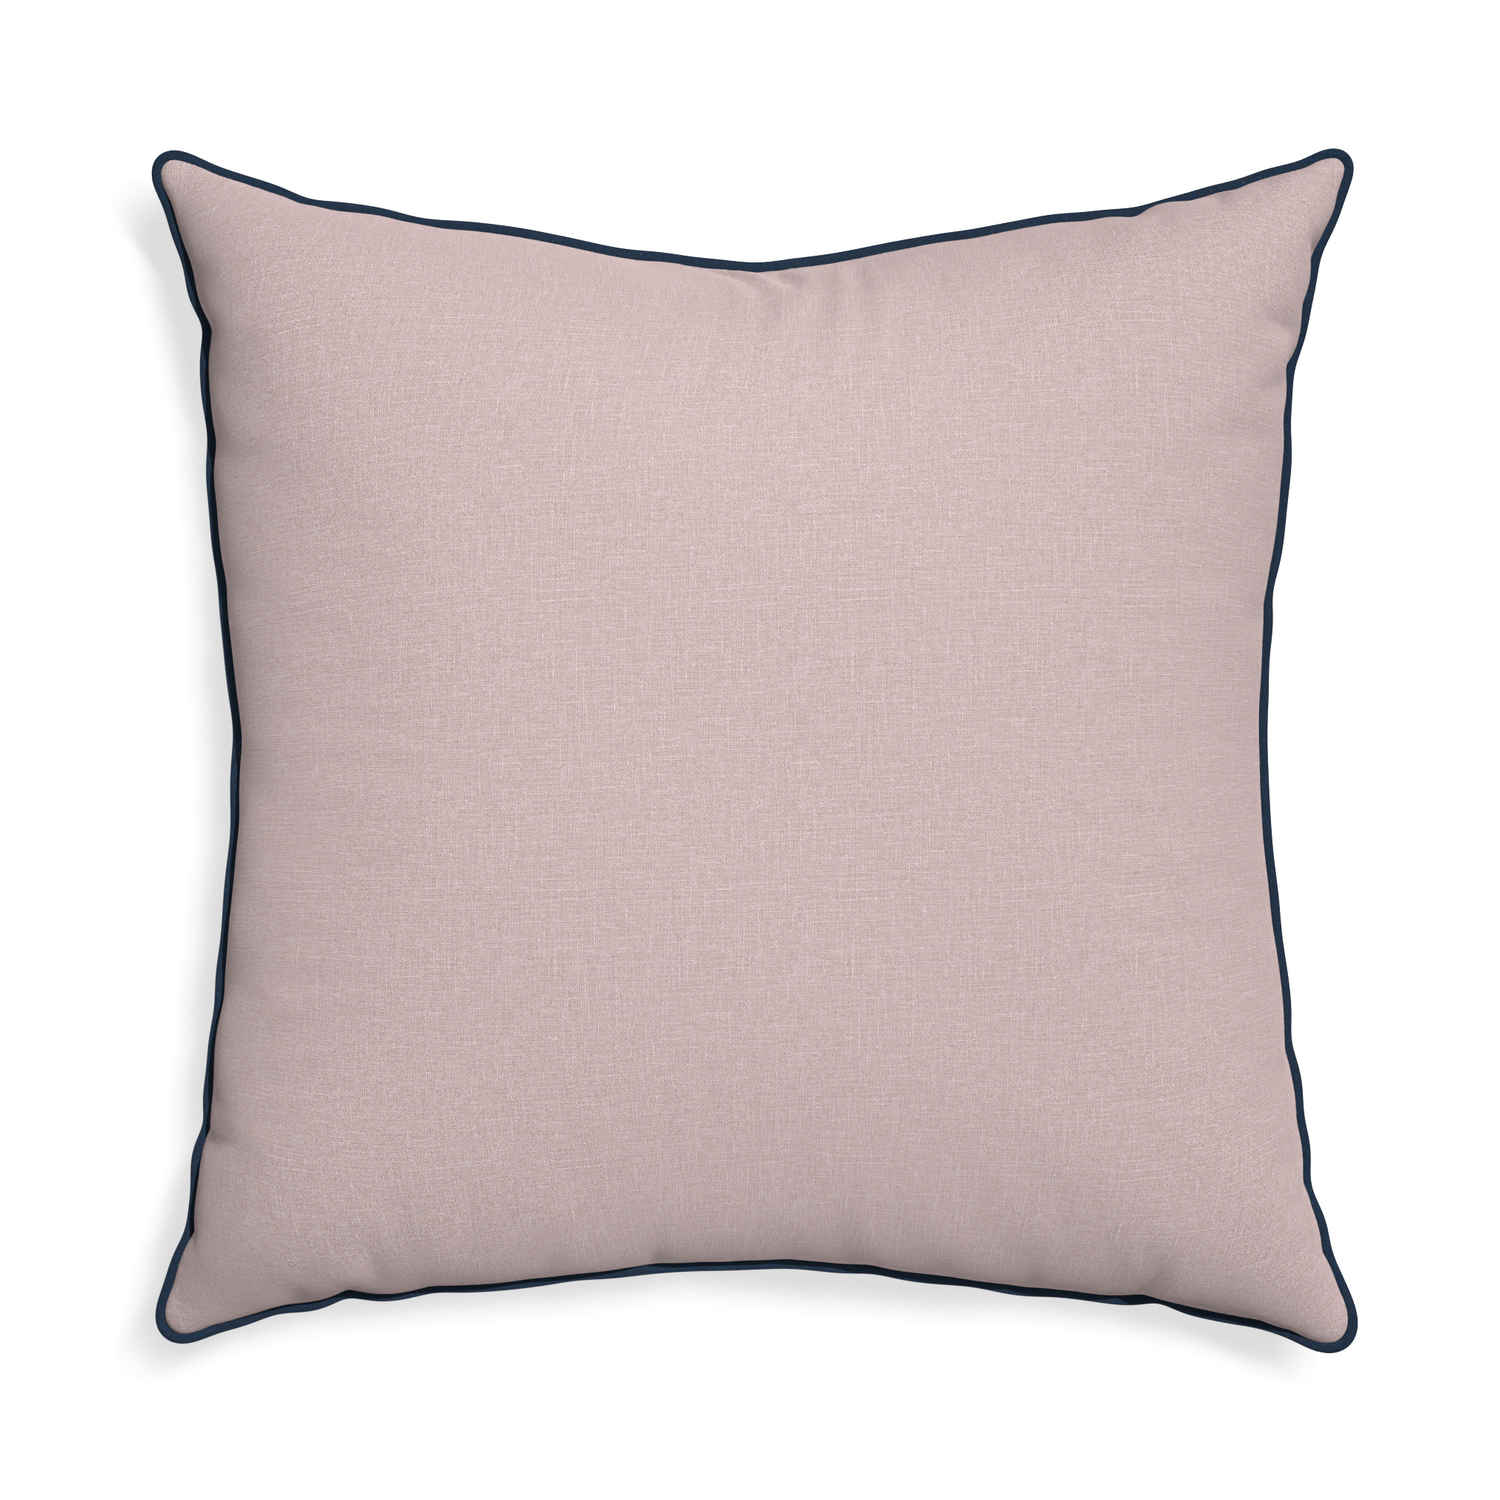 Euro-sham orchid custom mauve pinkpillow with c piping on white background